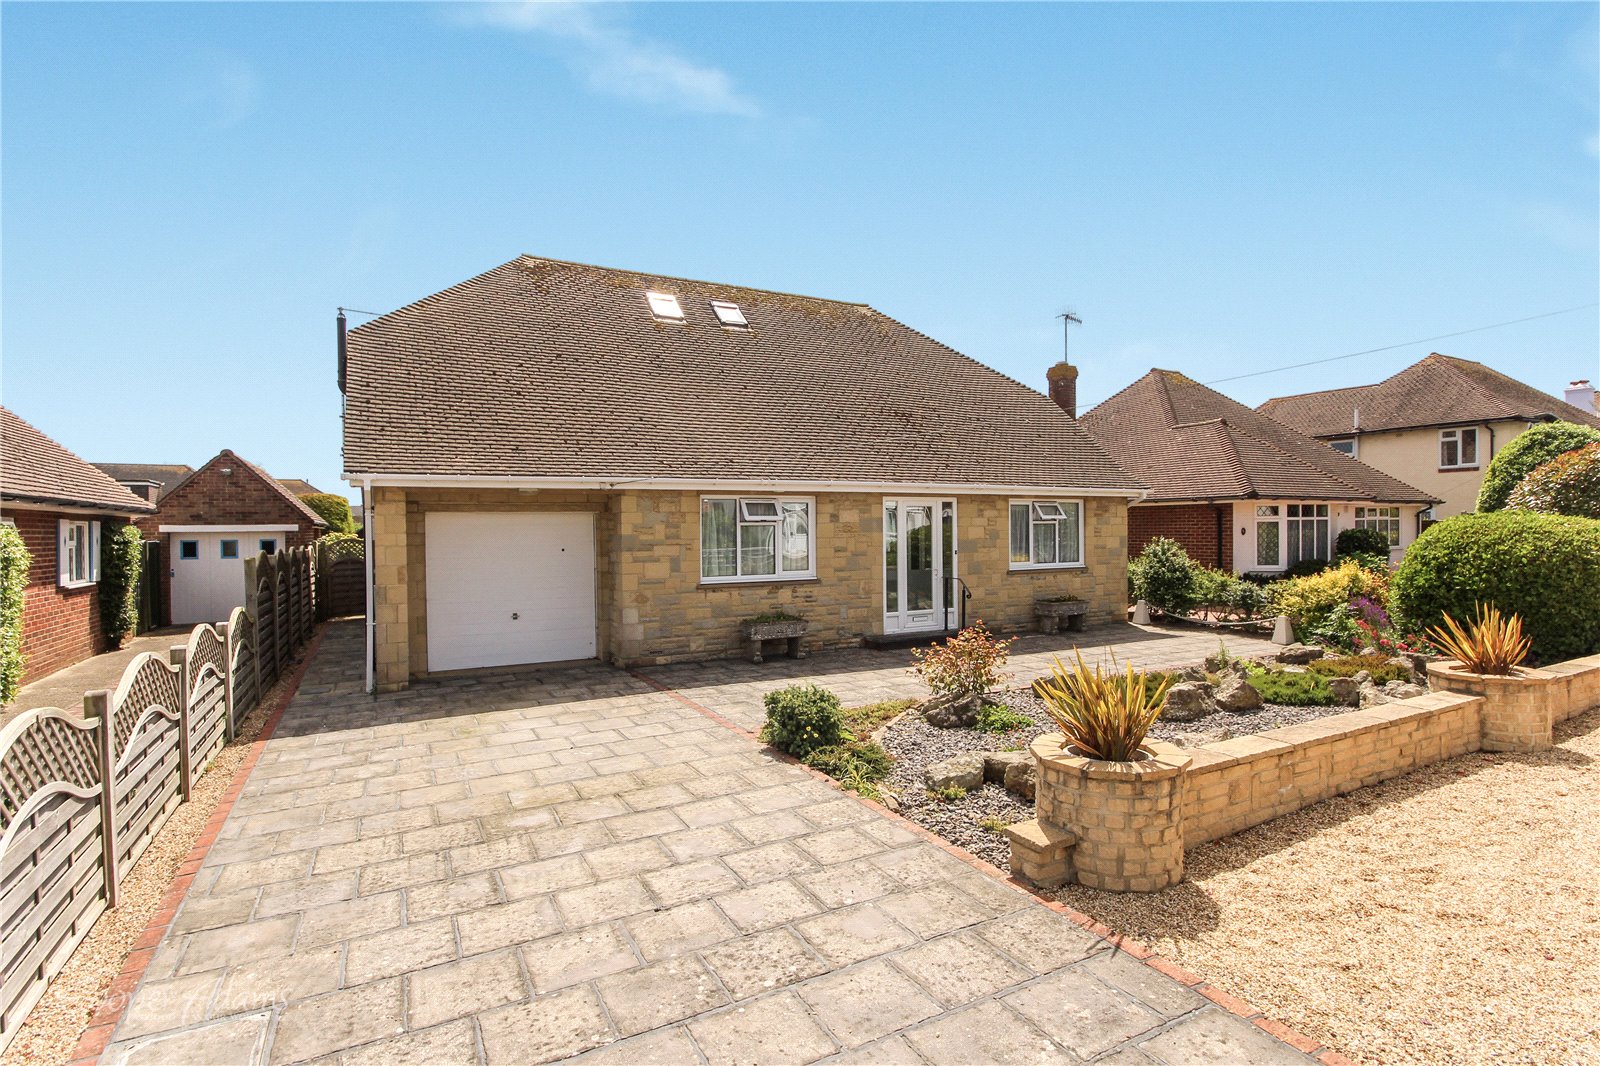 4 bed bungalow for sale in Cudlow Avenue, Rustington - Property Image 1